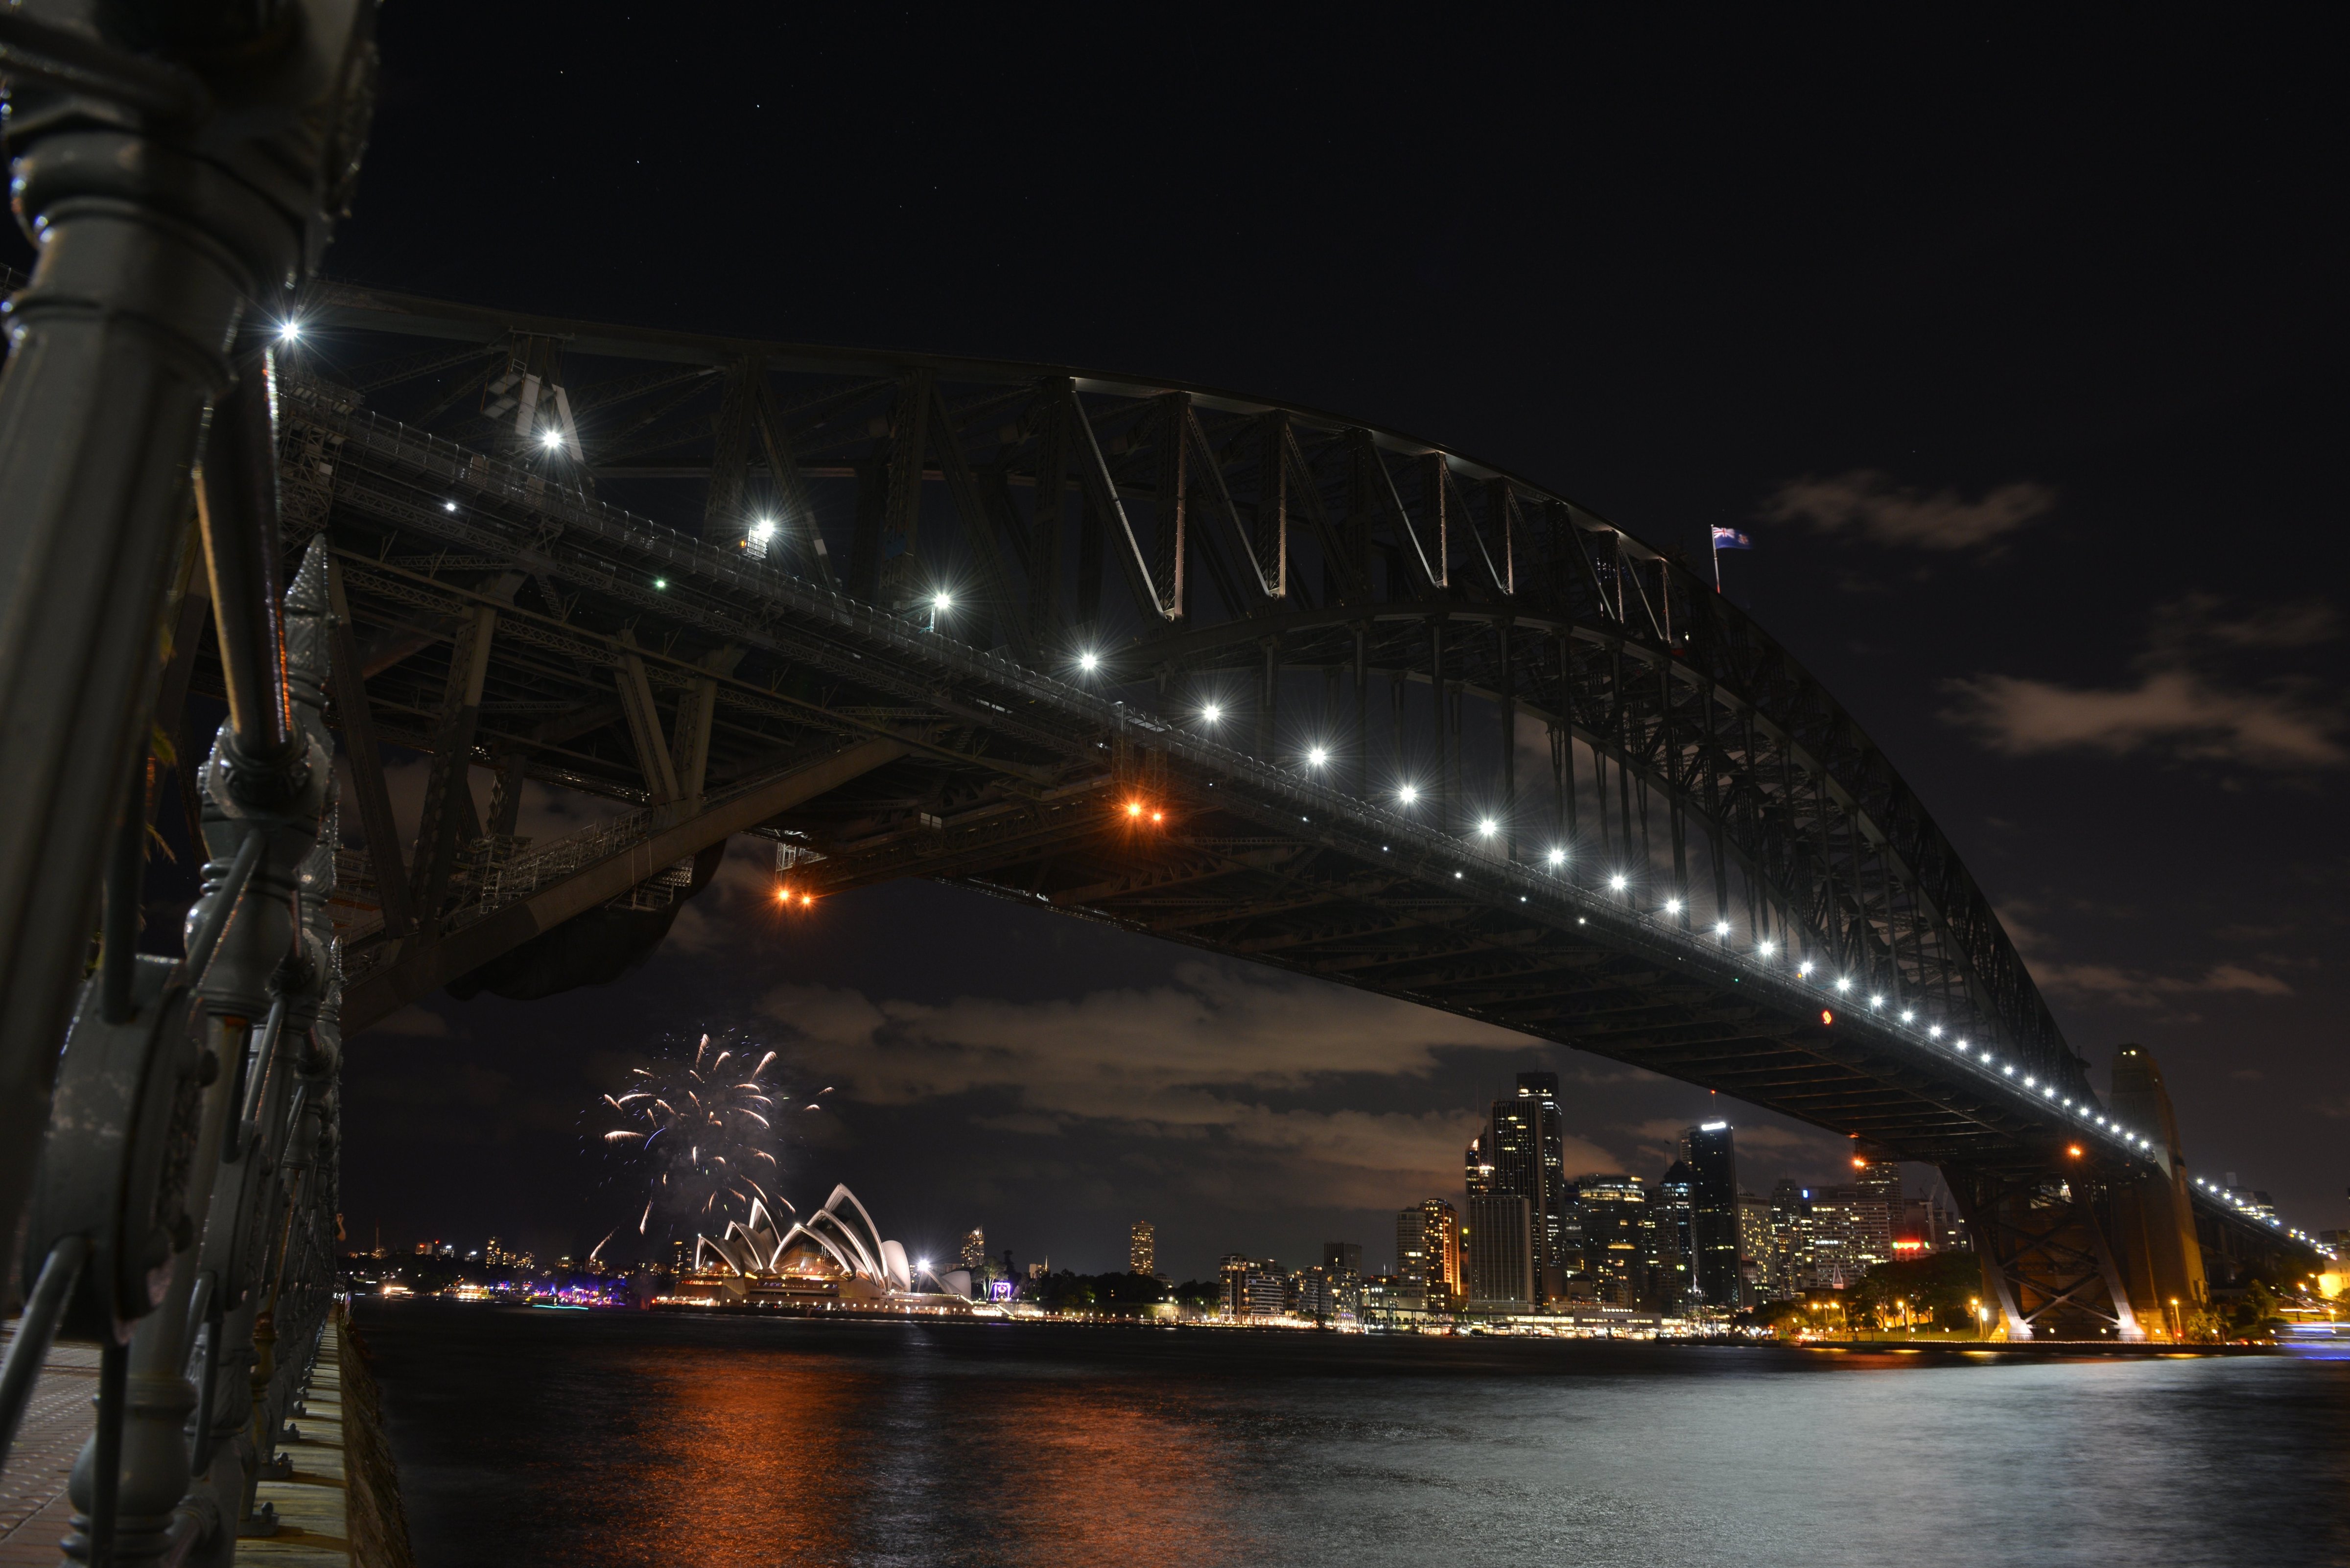 Fireworks fade as lights go out on the Sydney Harbour Bridge and Opera House to signal the start of the Earth Hour environmental campaign, among the first landmarks around the world to dim their lights for the event on March 28, 2015. (Peter Parks&mdash;AFP/Getty Images)